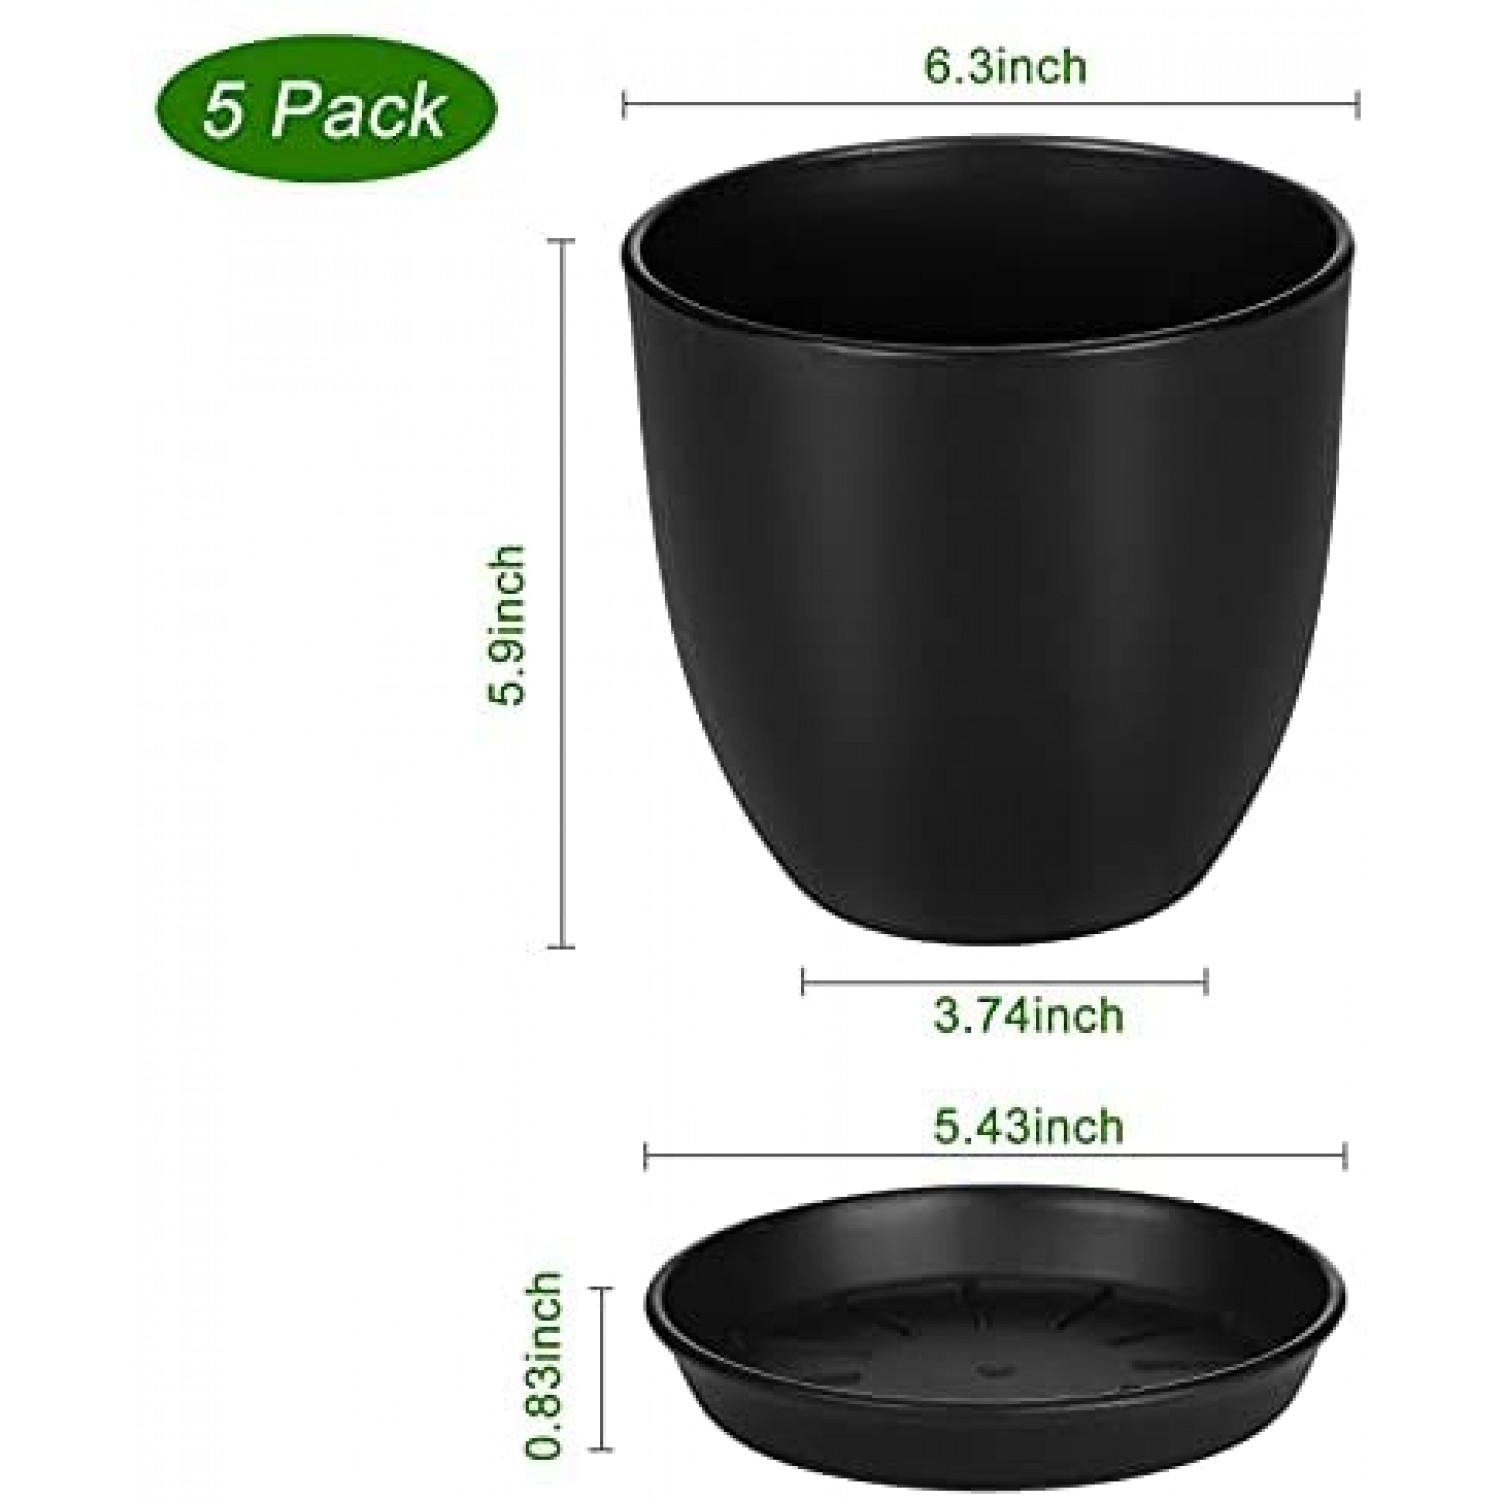 2 Pack Plant Pot Garden Round Flower Planter Plastic Pots With Saucer Tray Deco 